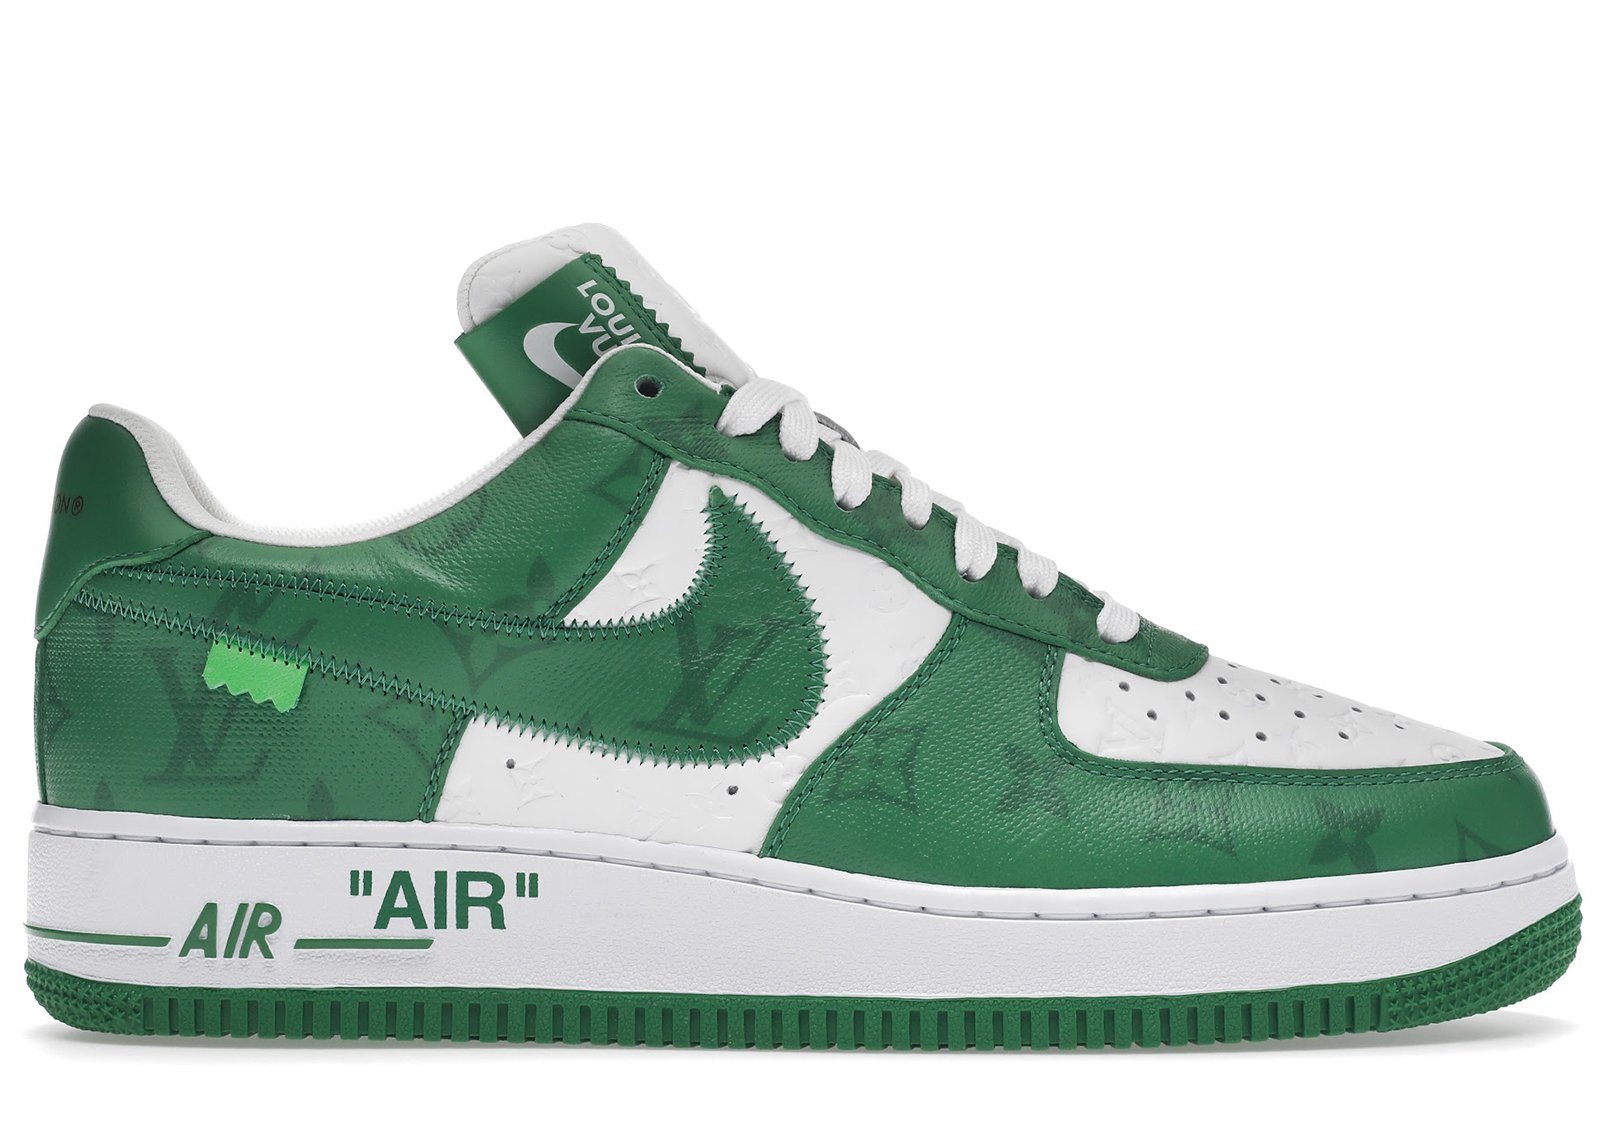 Louis Vuitton Nike Air Force 1 Low By Virgil Abloh White Green sneakers